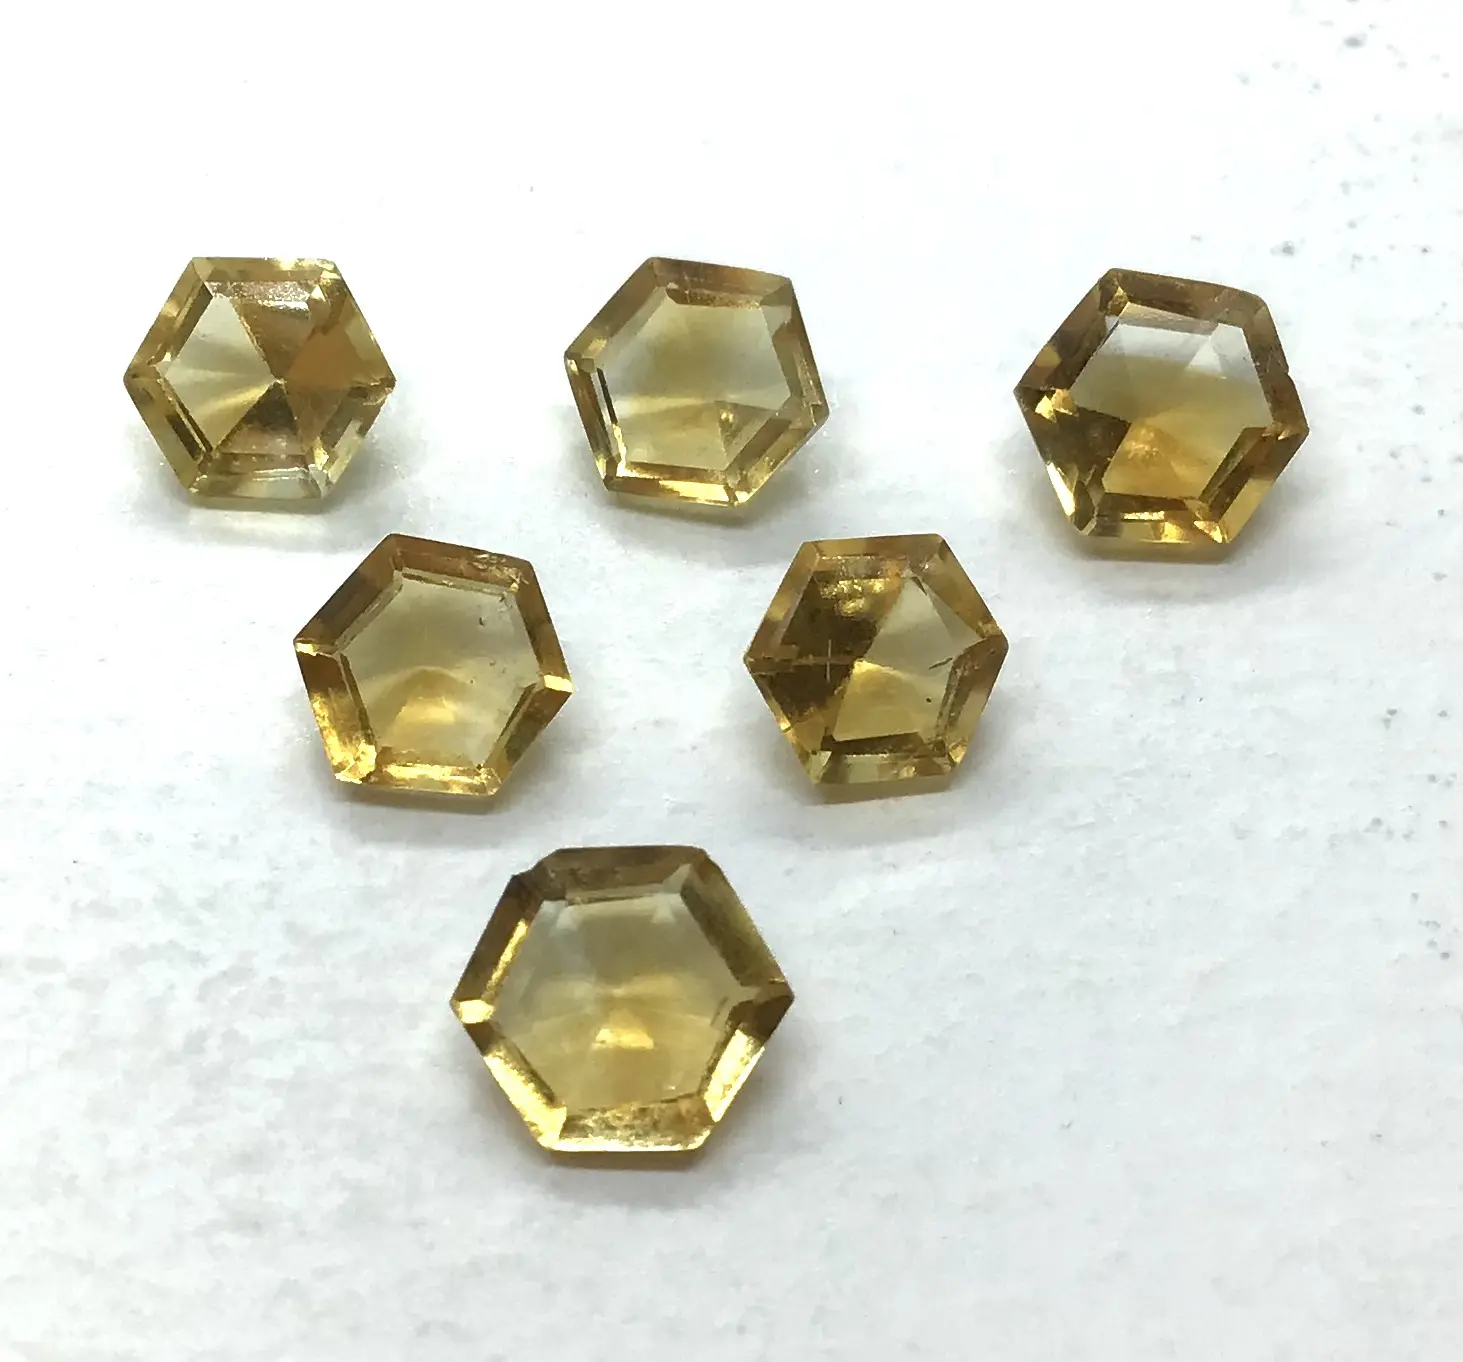 High Quality Citrine Faceted Gemstone Top Color Citrine Faceted Stone For Ring Earring Pendant Jewelery Stones